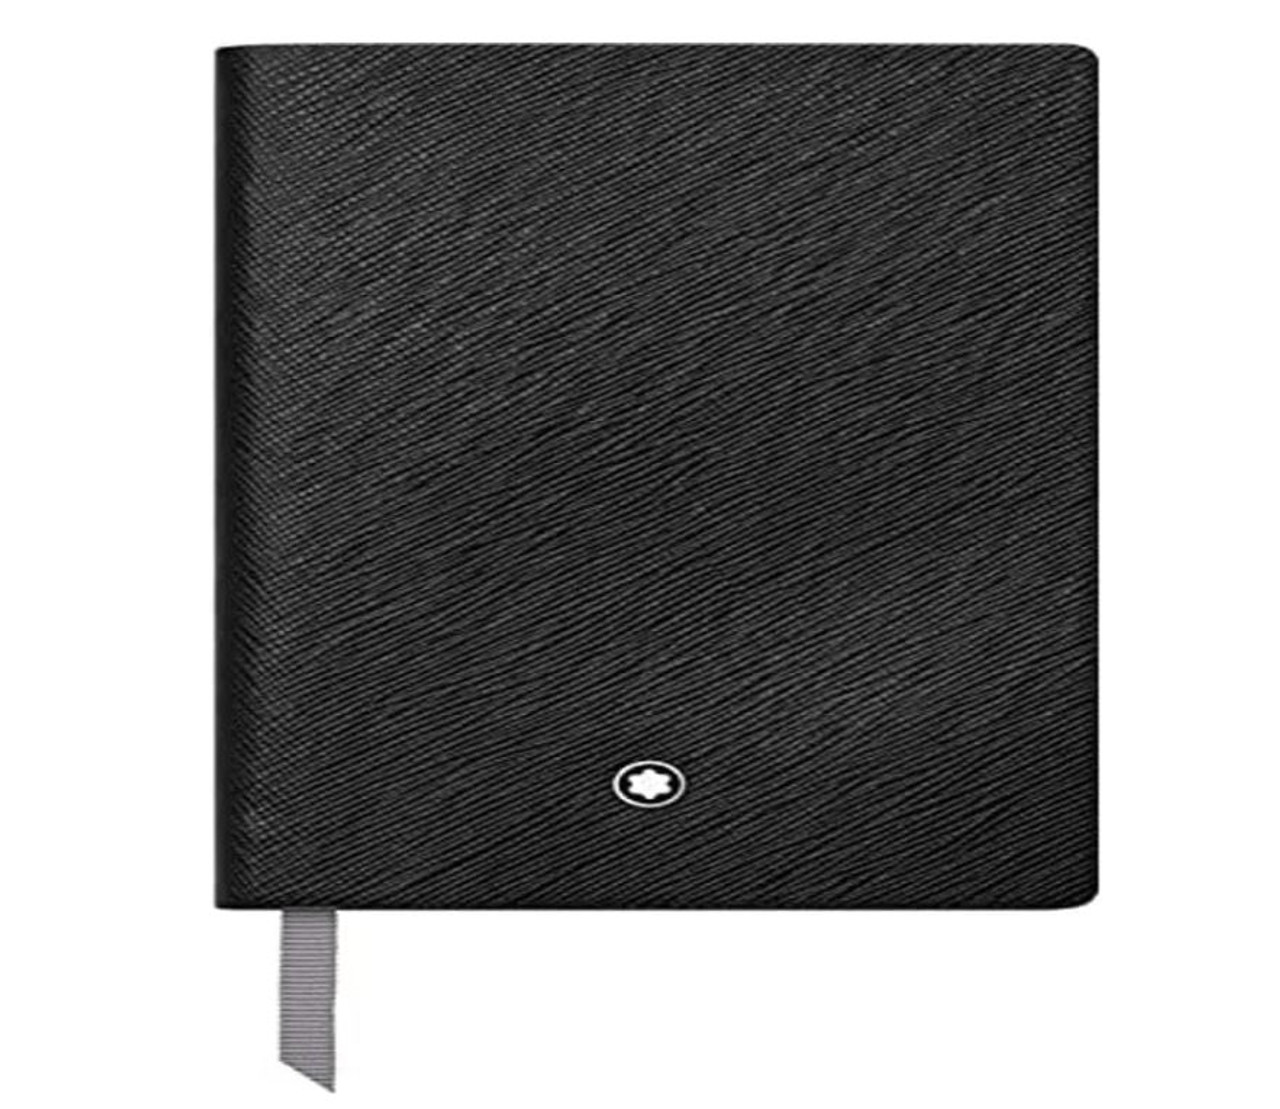 Montblanc Fine Stationery Notebook #146 - Black - Squared